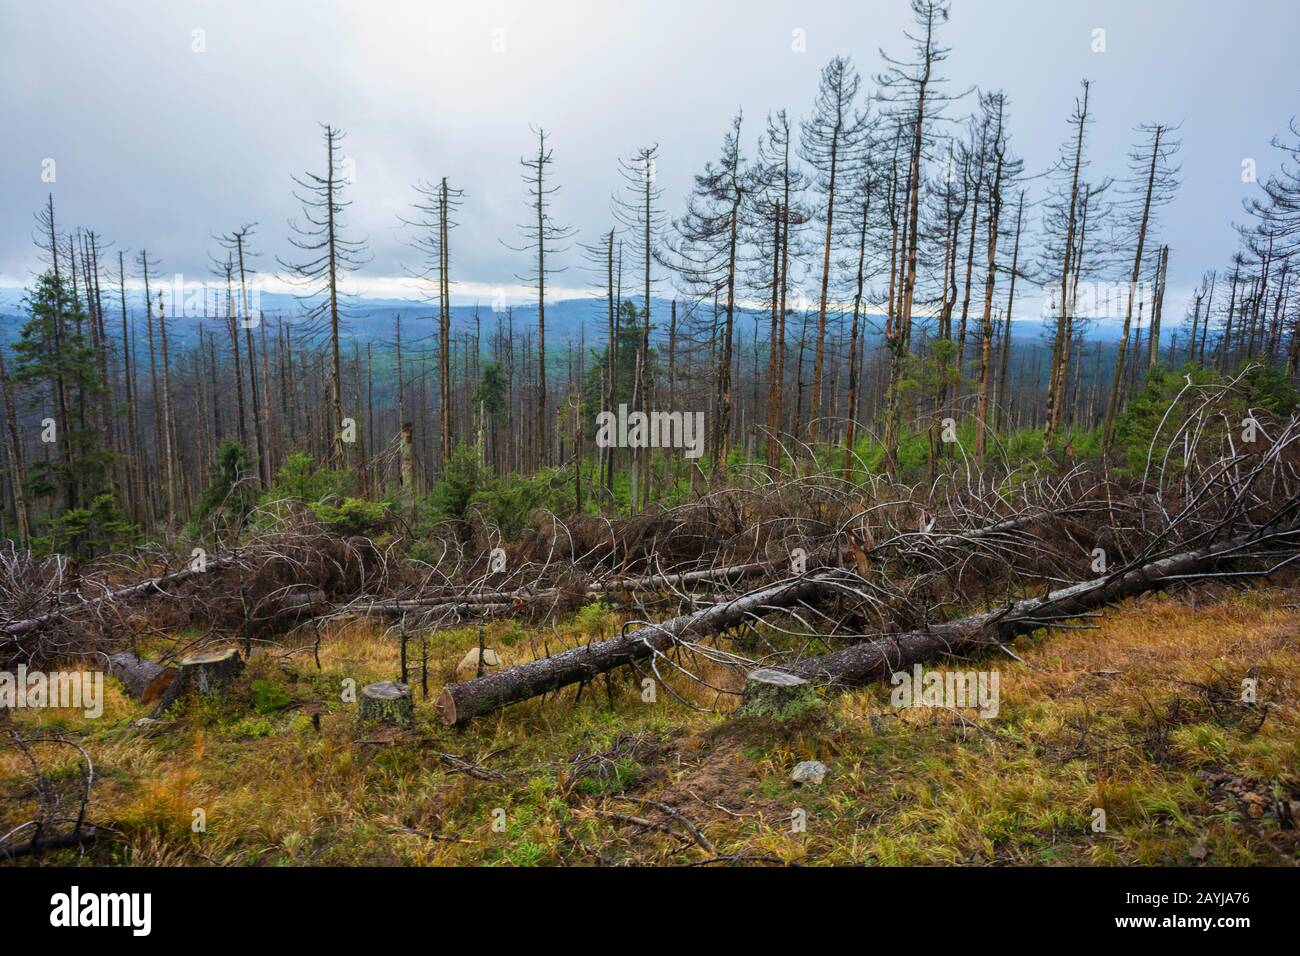 spruce forest at the Brocken, damages from bark beetles, Germany, Lower Saxony, Harz National Park Stock Photo